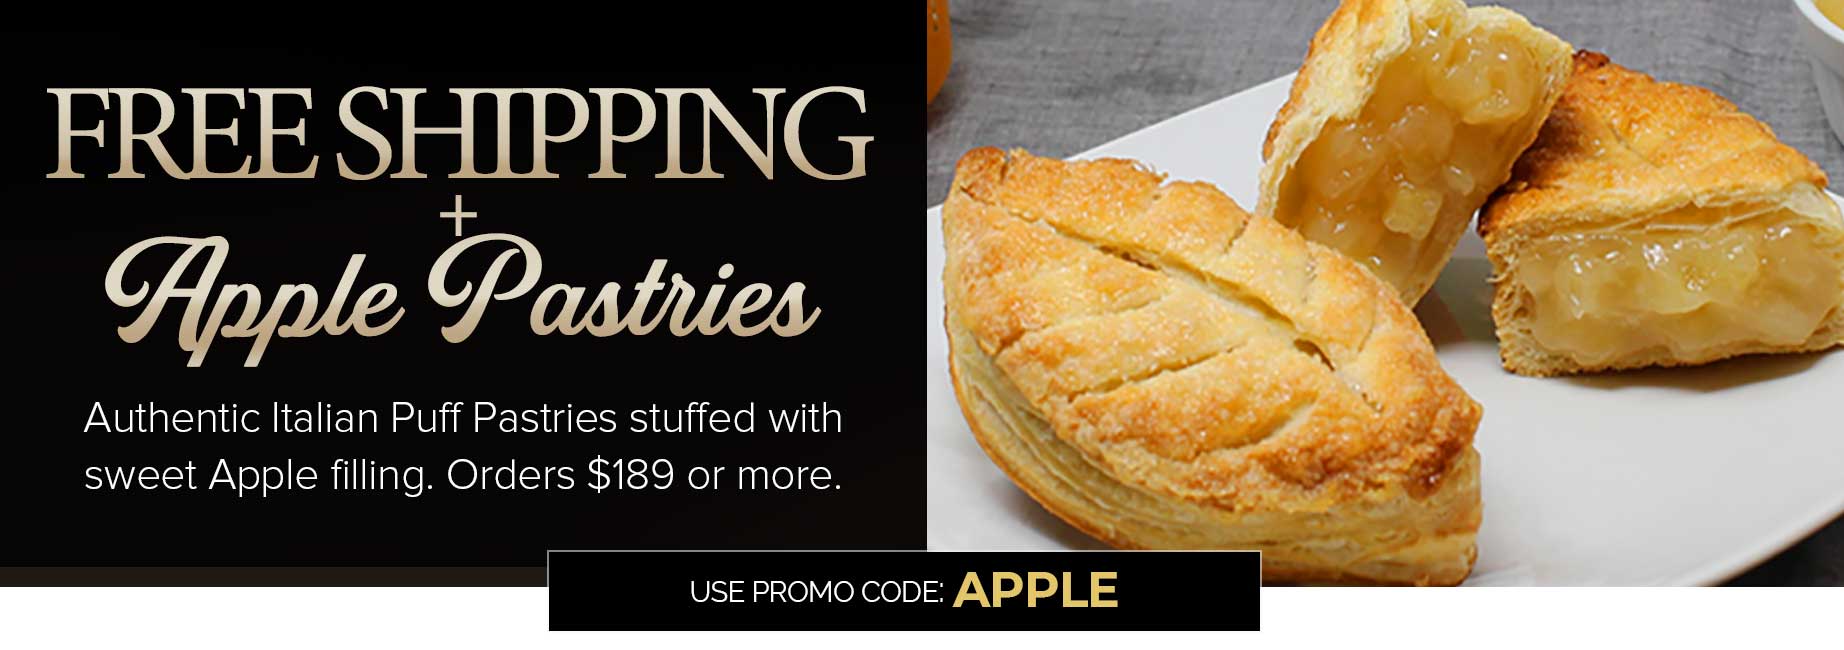 get FREE apple pastries and free standard shipping on orders $189+ PROMO CODE: APPLE